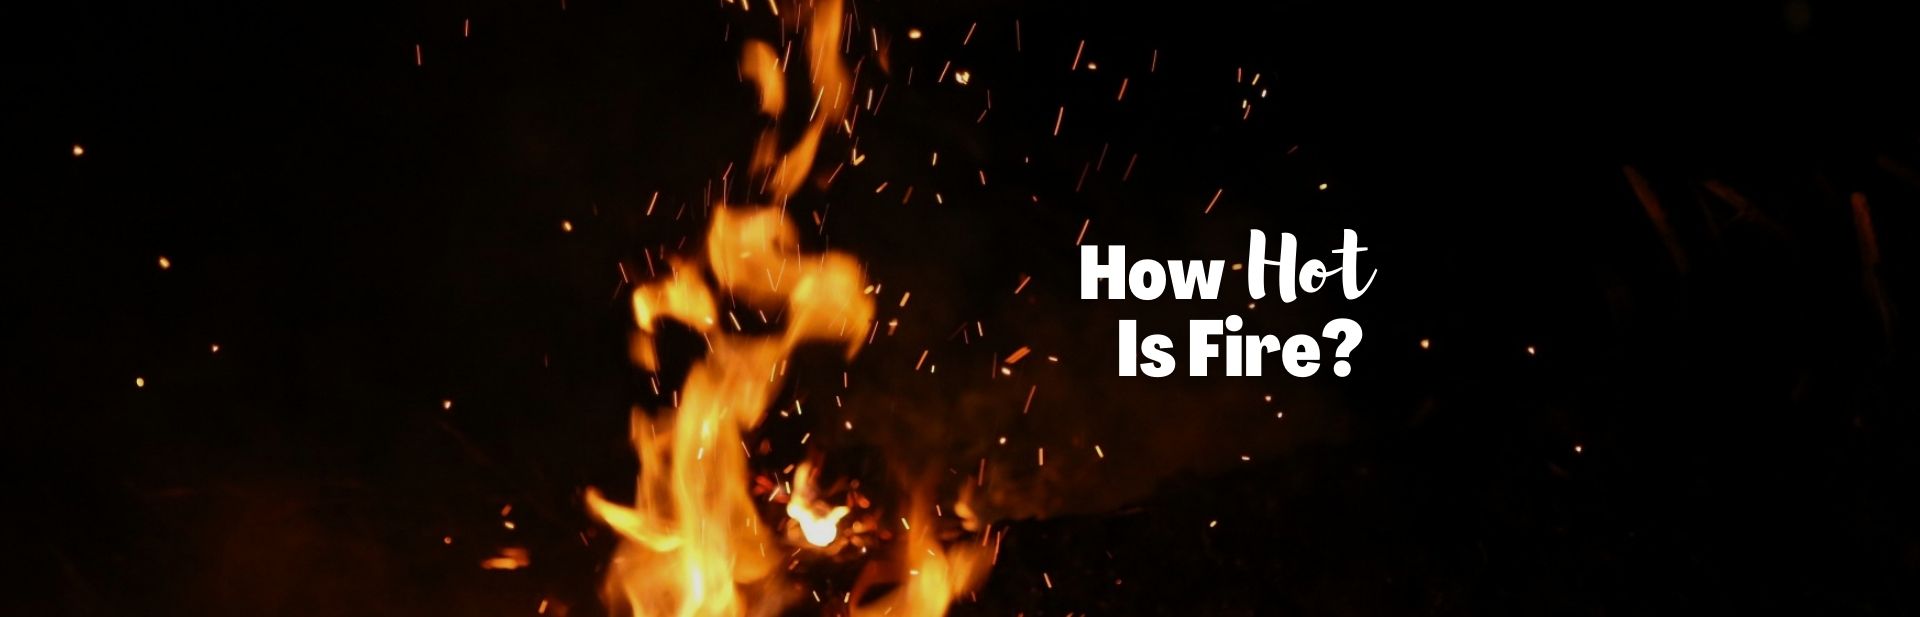 How Hot is Fire? A Scorching Look Into Flame Temperatures